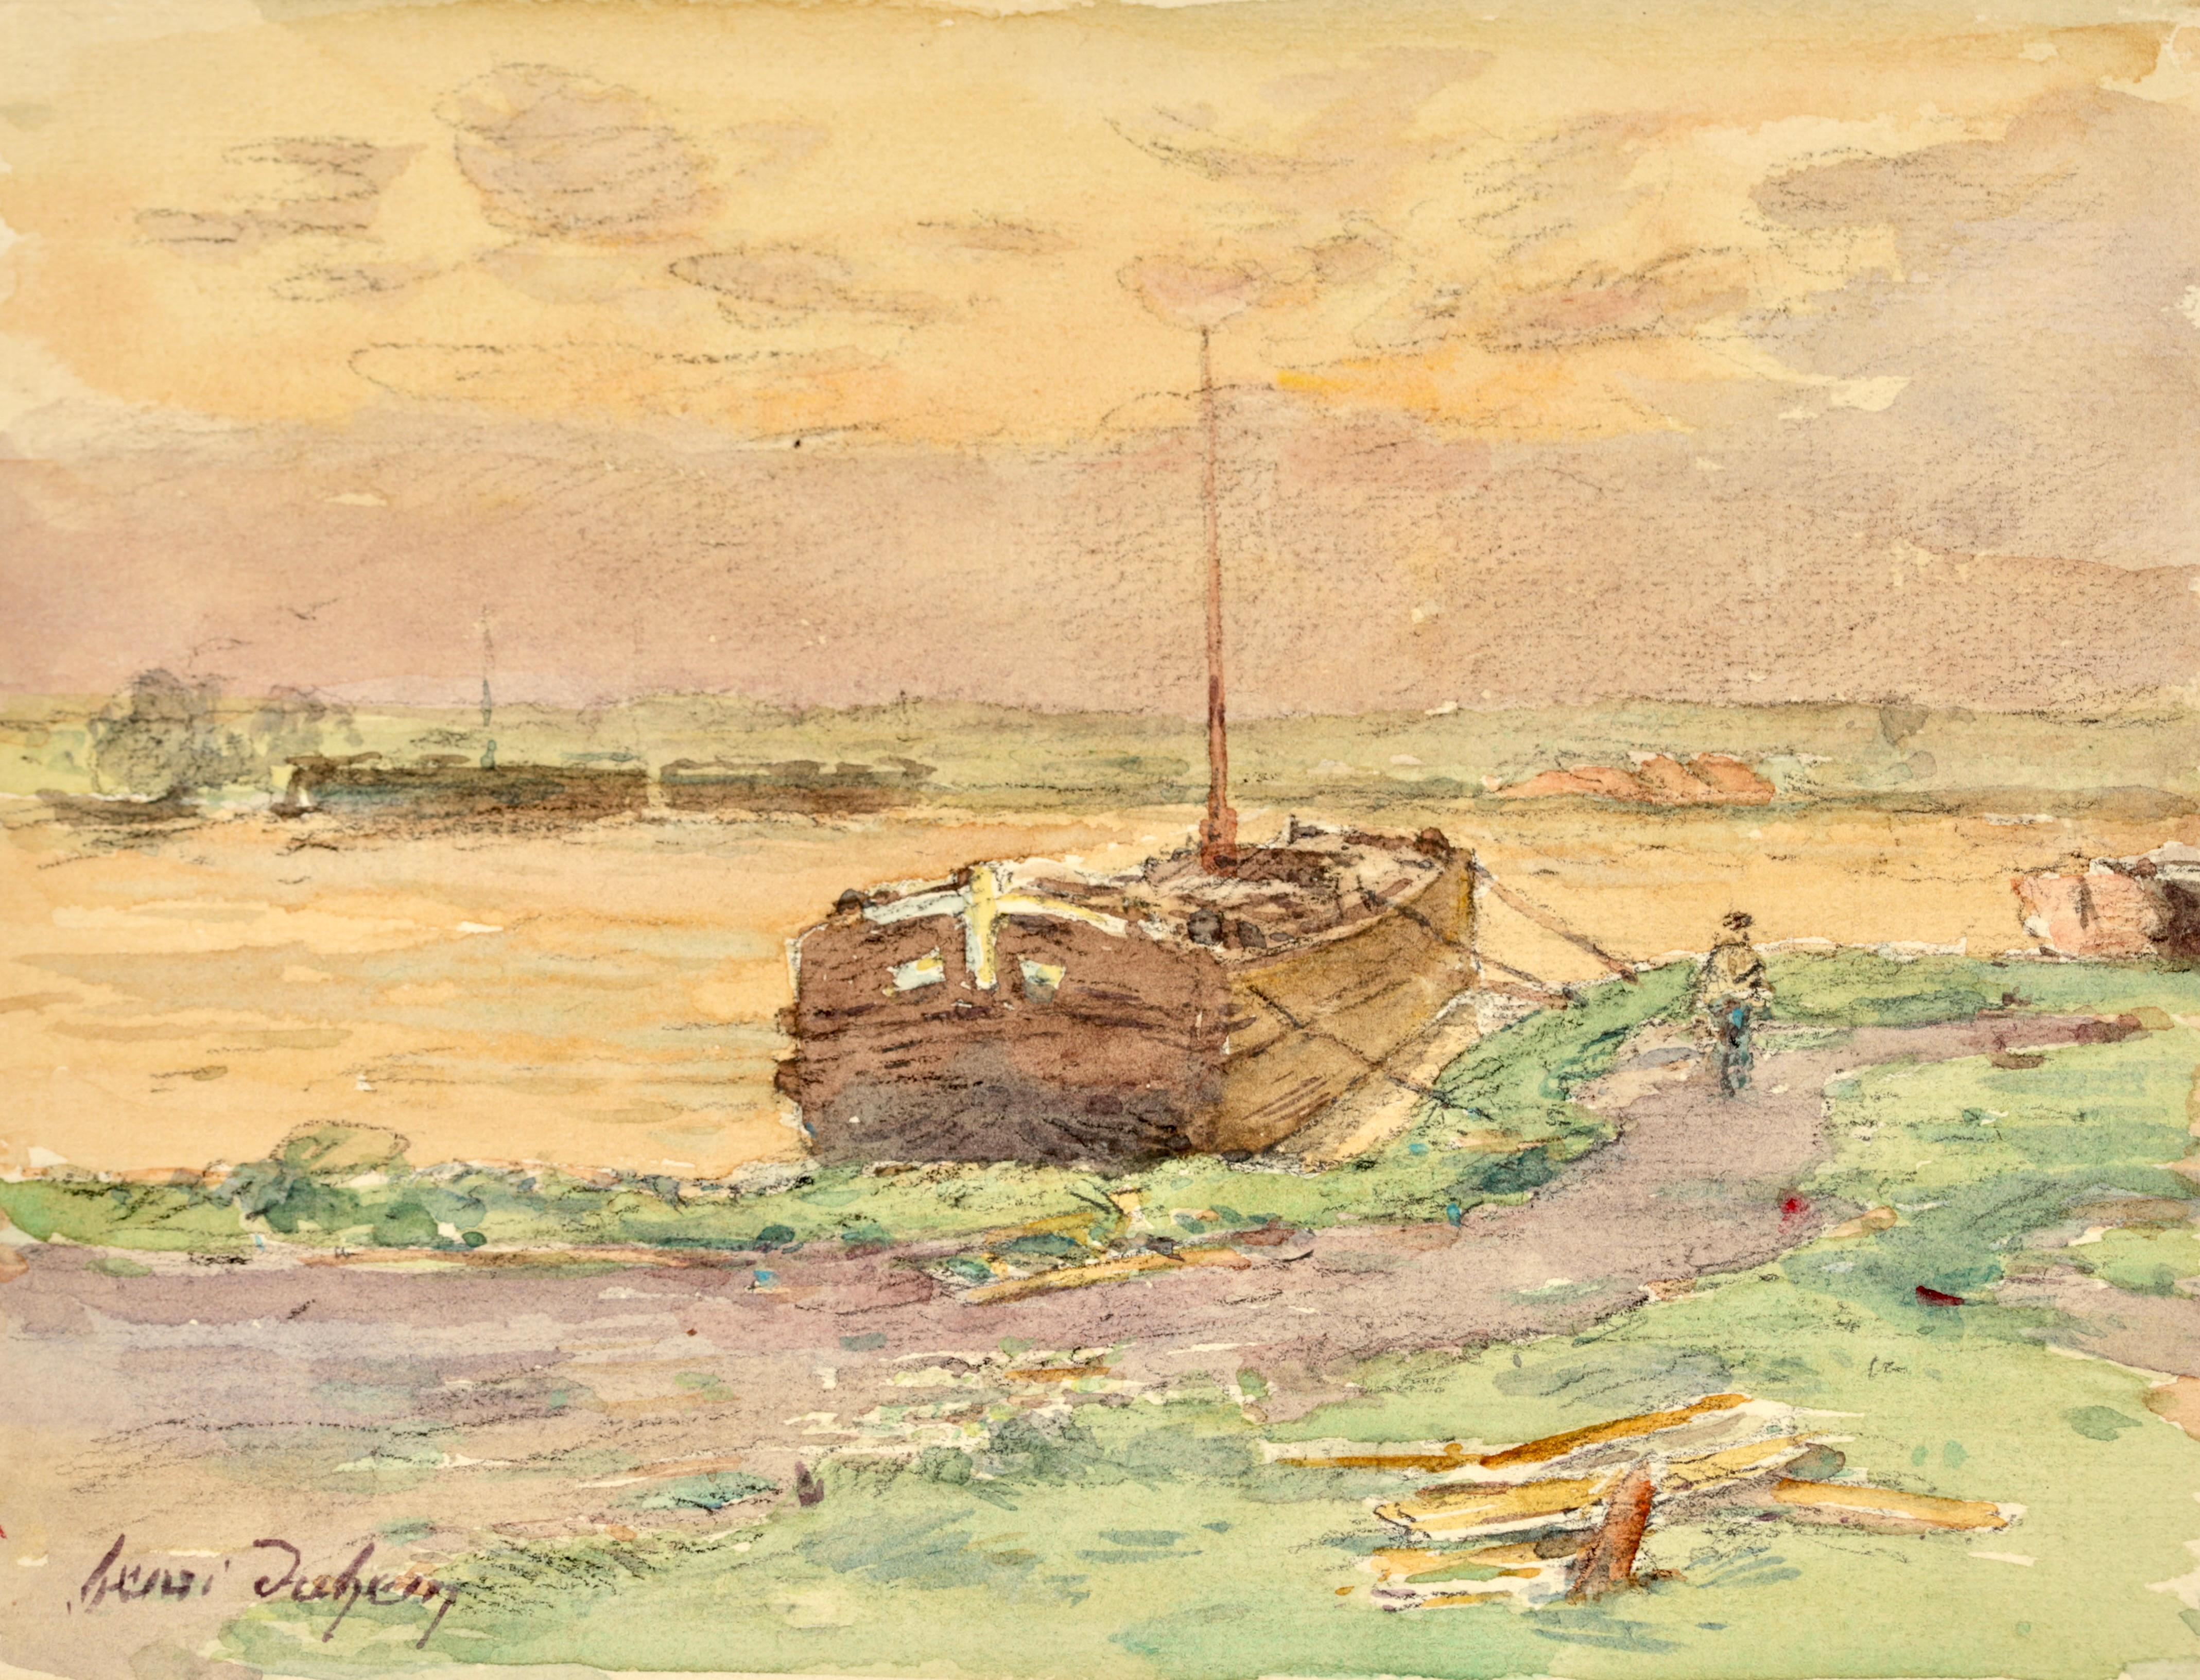 Signed impressionist landscape watercolour on paper circa 1920 by Henri Duhem. The piece depicts a figure walking along a path beside a boat moored on the river side. The sun is setting overhead as the evening draws in creating an orange-yellow sky